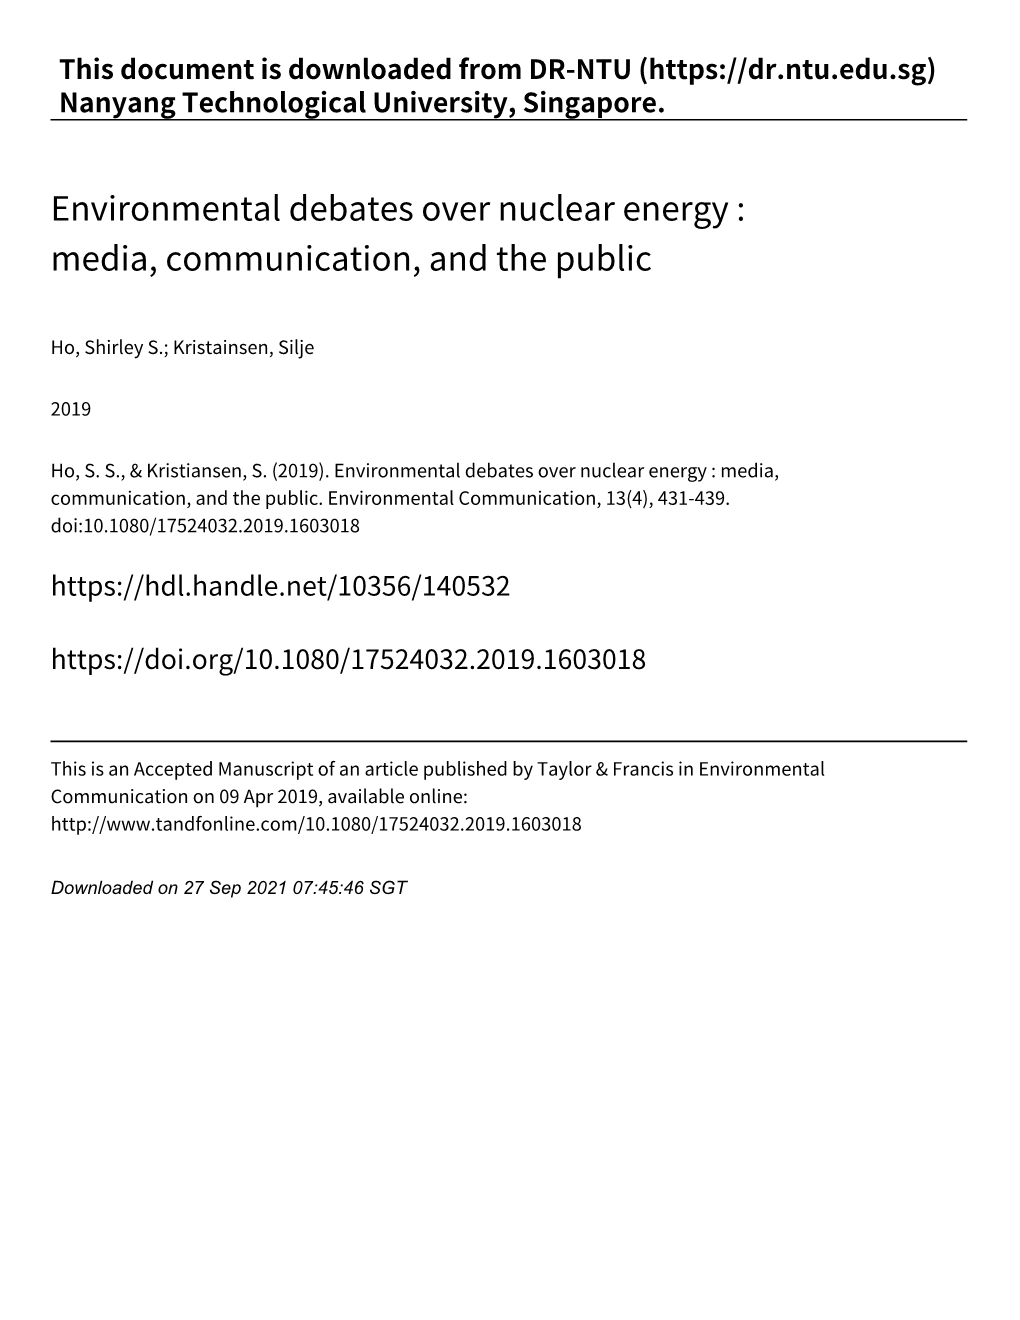 Environmental Debates Over Nuclear Energy : Media, Communication, and the Public